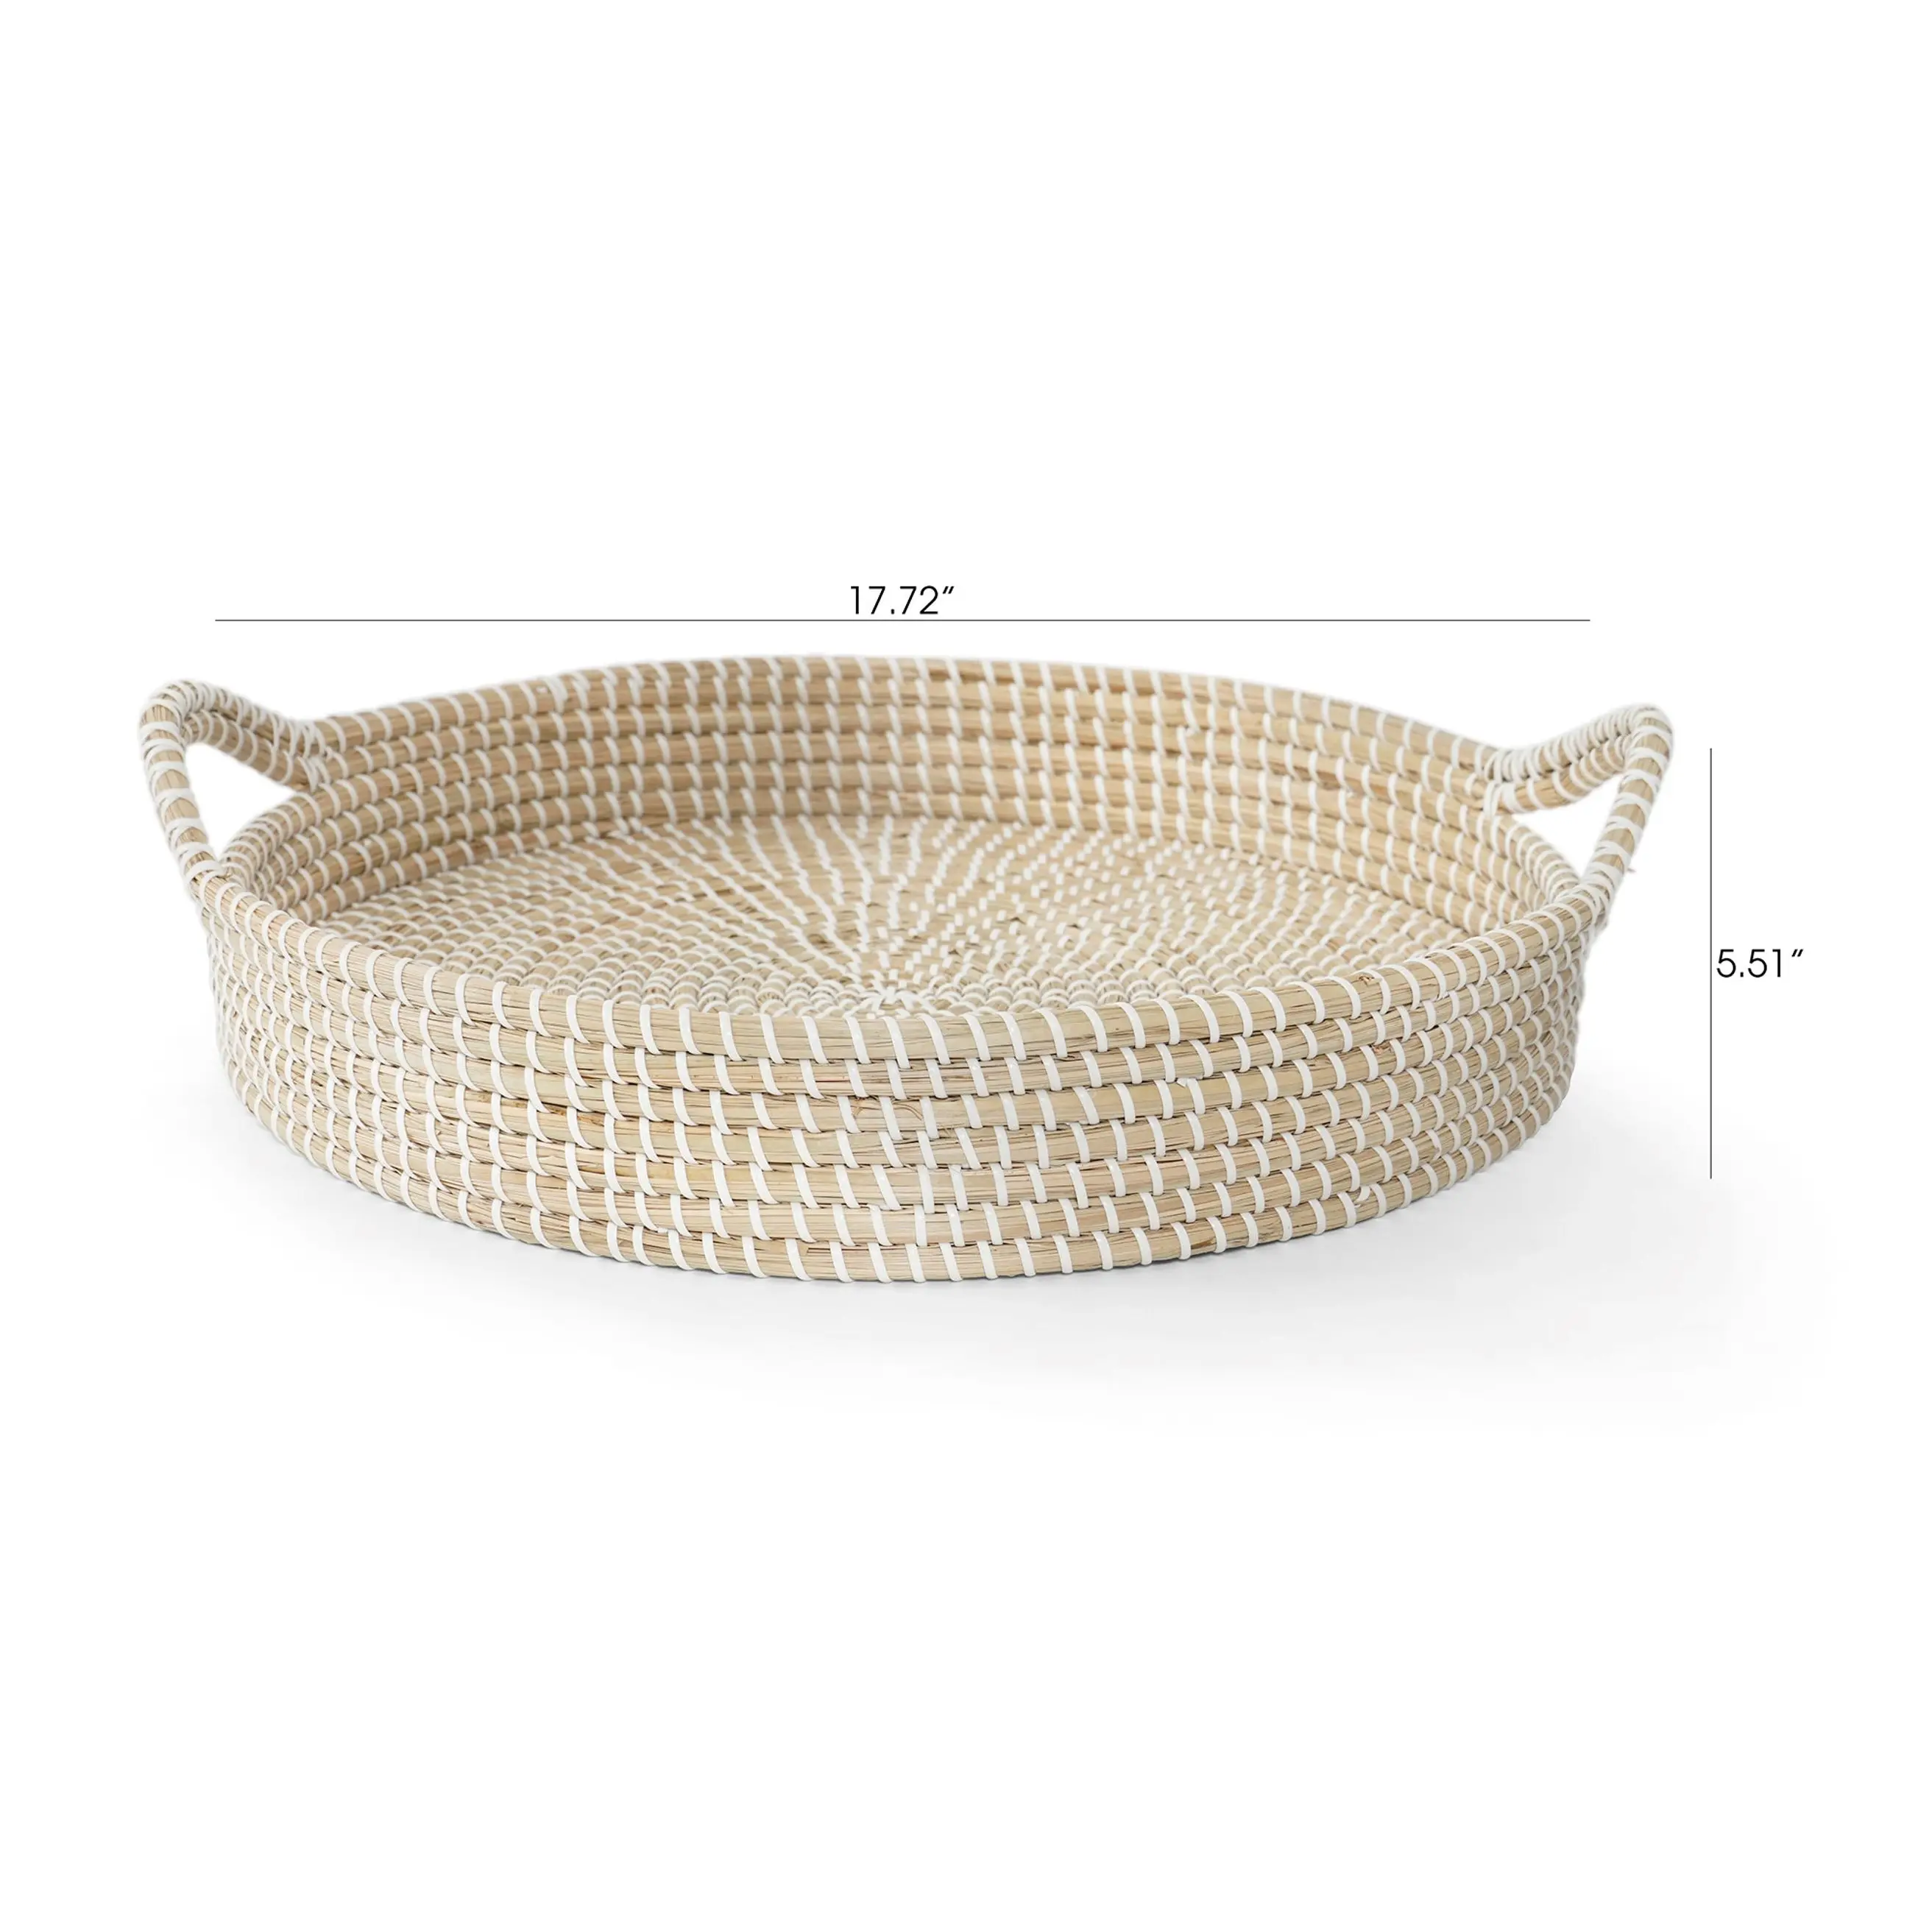 Hot selling manufacturer natural coiled seagrass serving trays with handle Custom Handmade Woven Seagrass Serving Tray